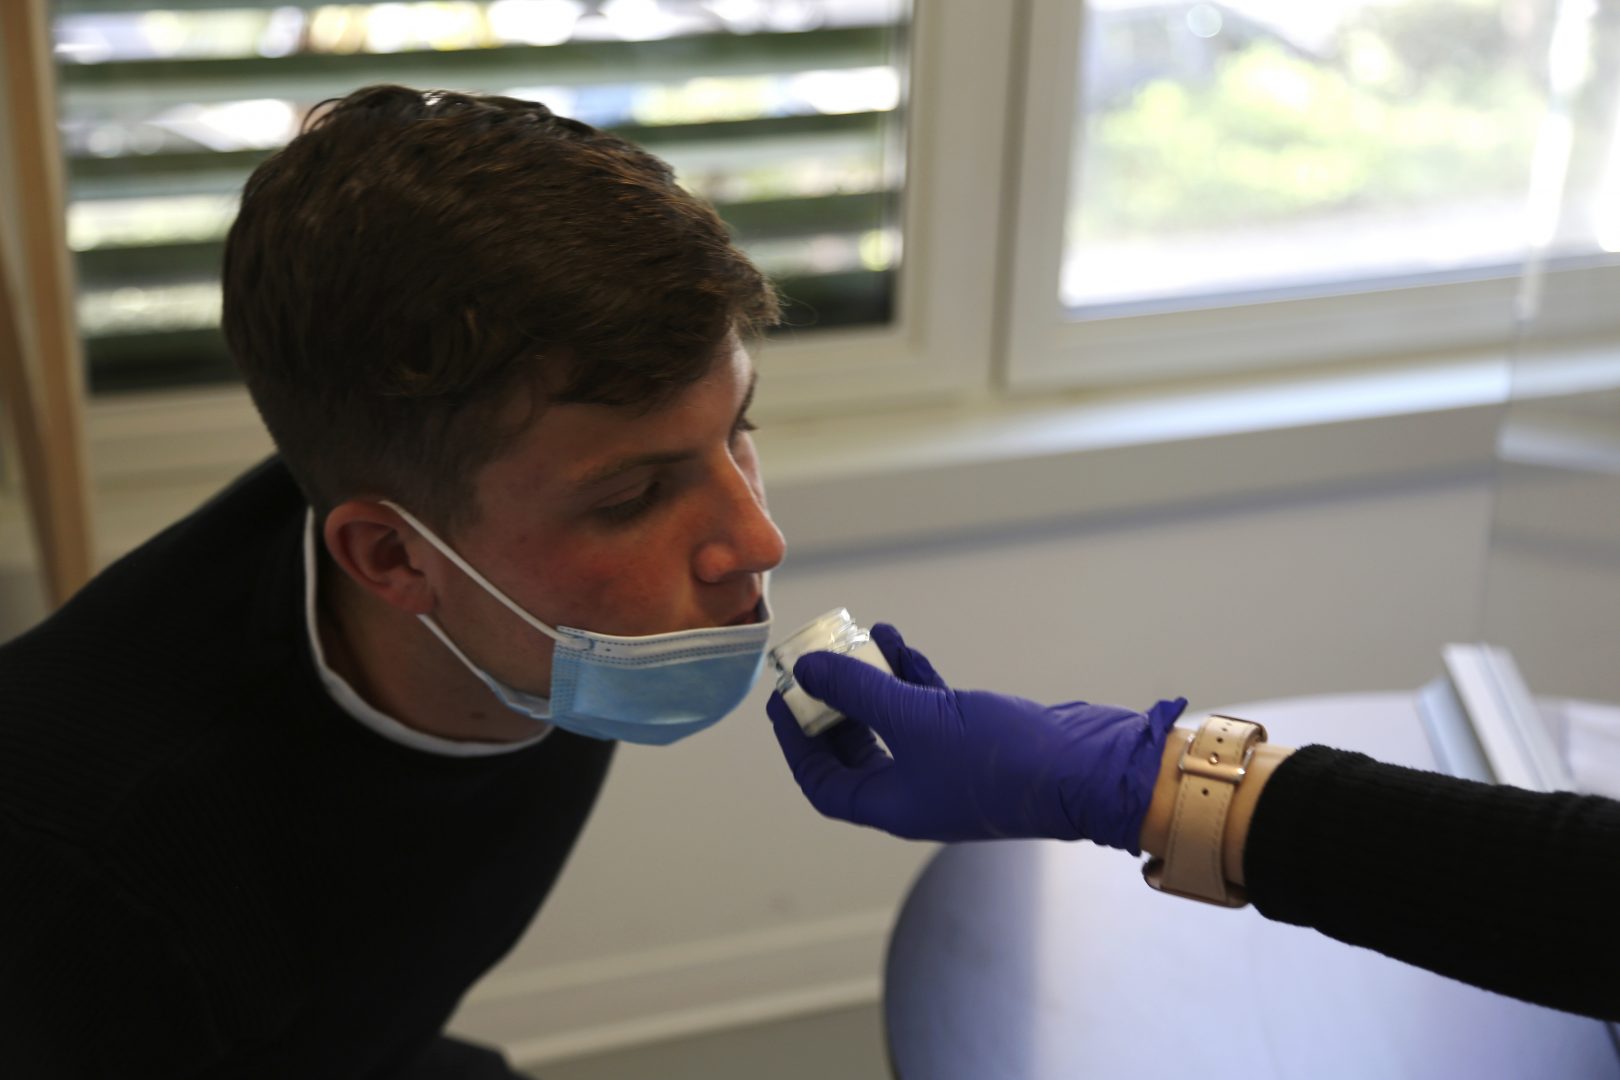 Evan Cesa, a patient, smells a small pot of fragrance during tests in a clinic in Nice, France, on Monday, Feb. 8, 2021, to help determine how his sense of smell and taste have been degraded since he contracted COVID-19 in September 2020.